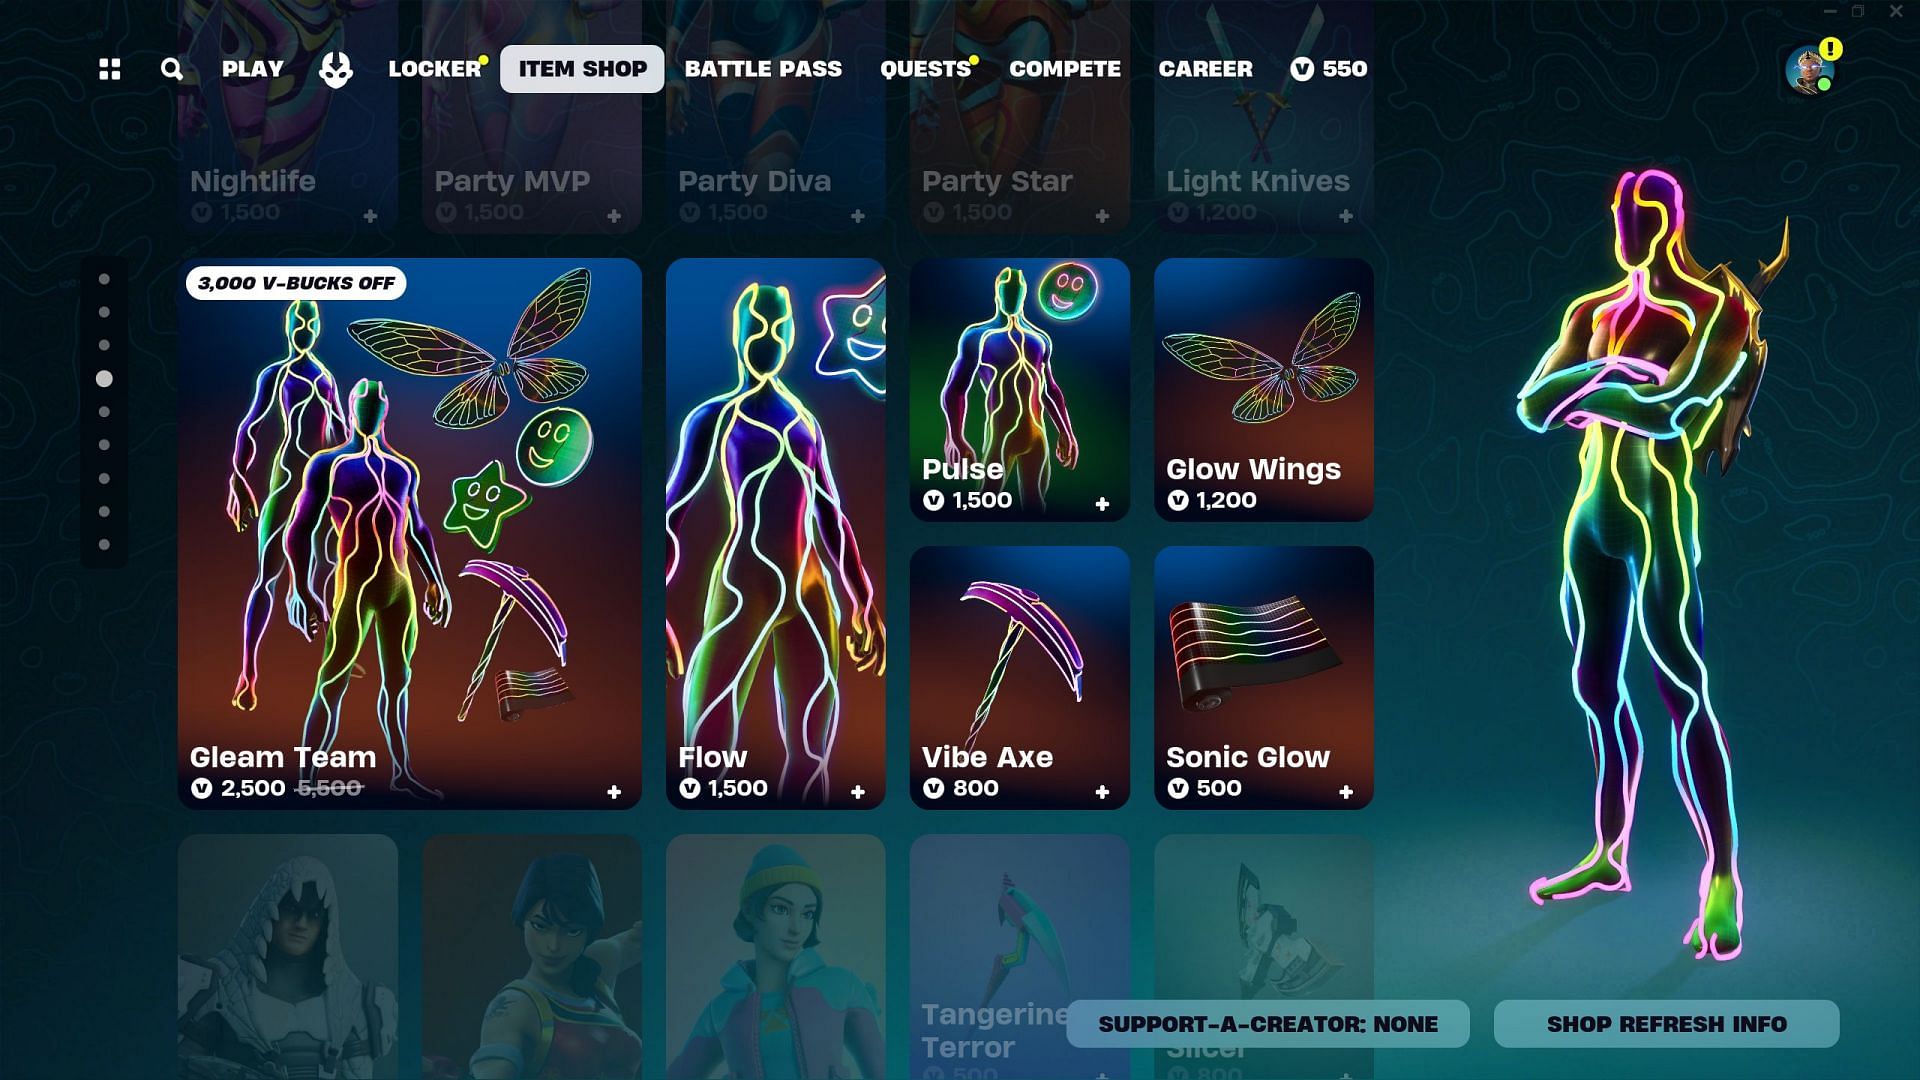 Pulse and Flow skins are currently listed in the Item Shop (Image via Epic Games)